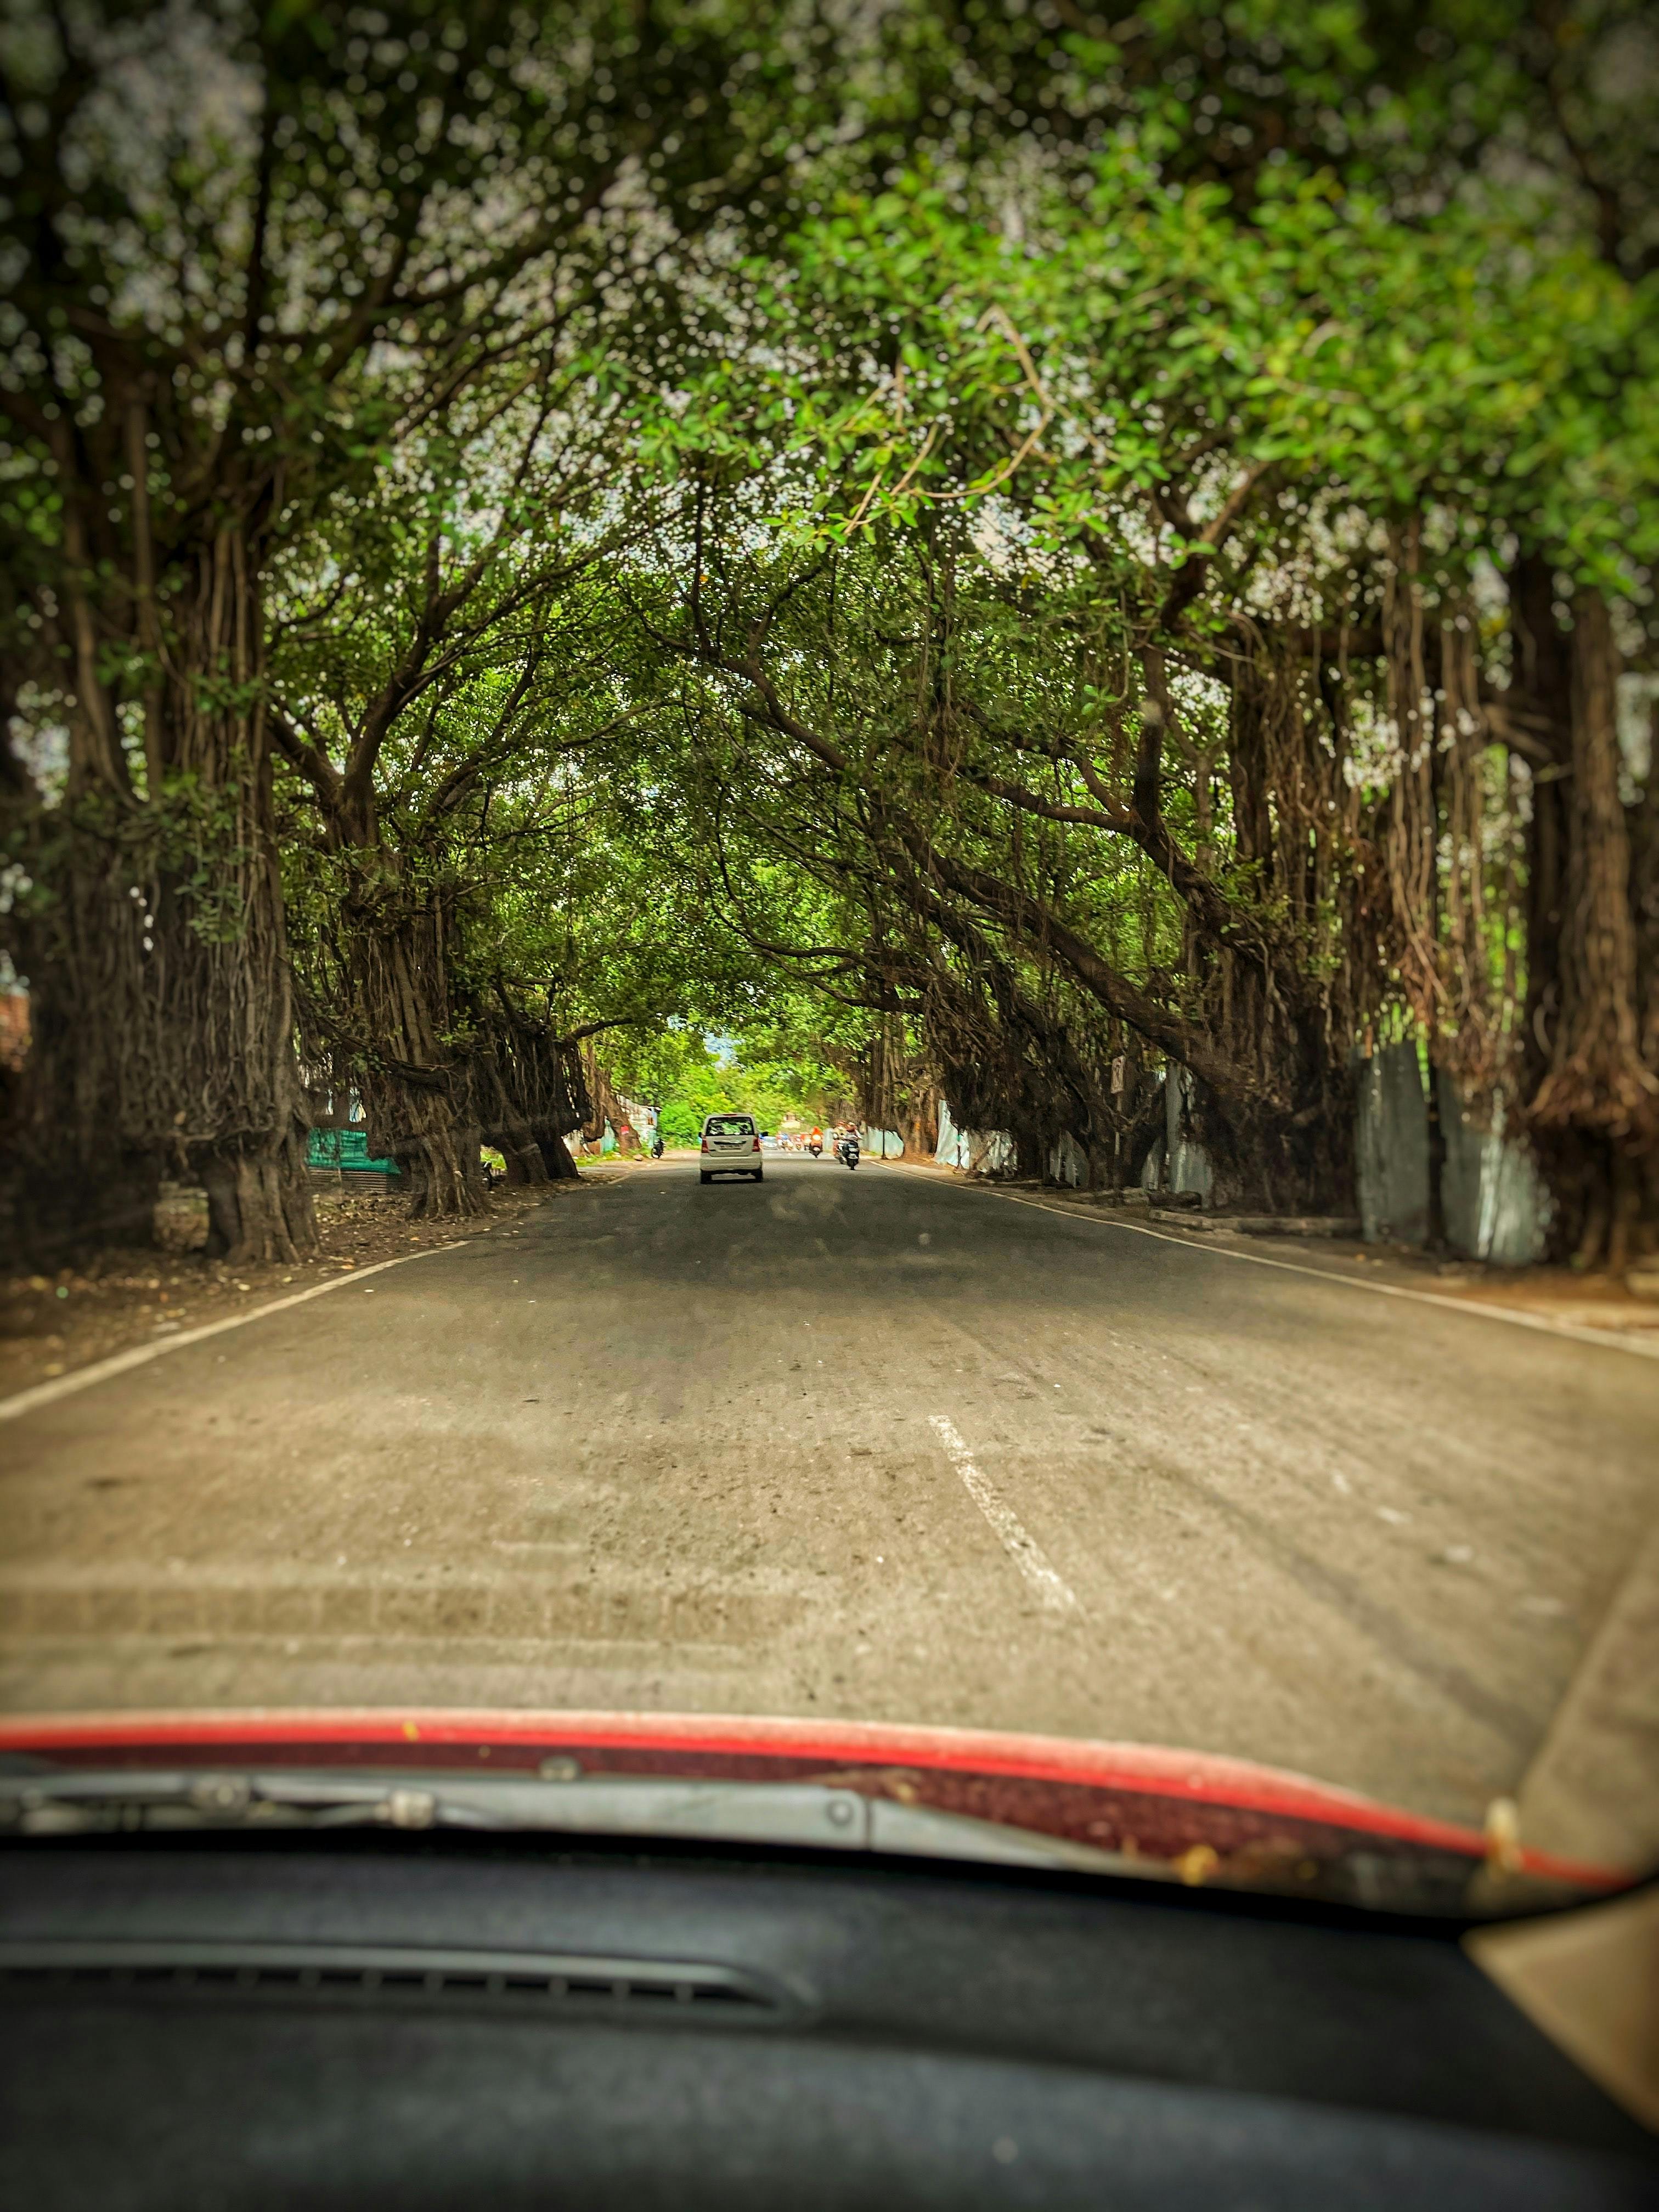 Tree-lined street in Pune, India